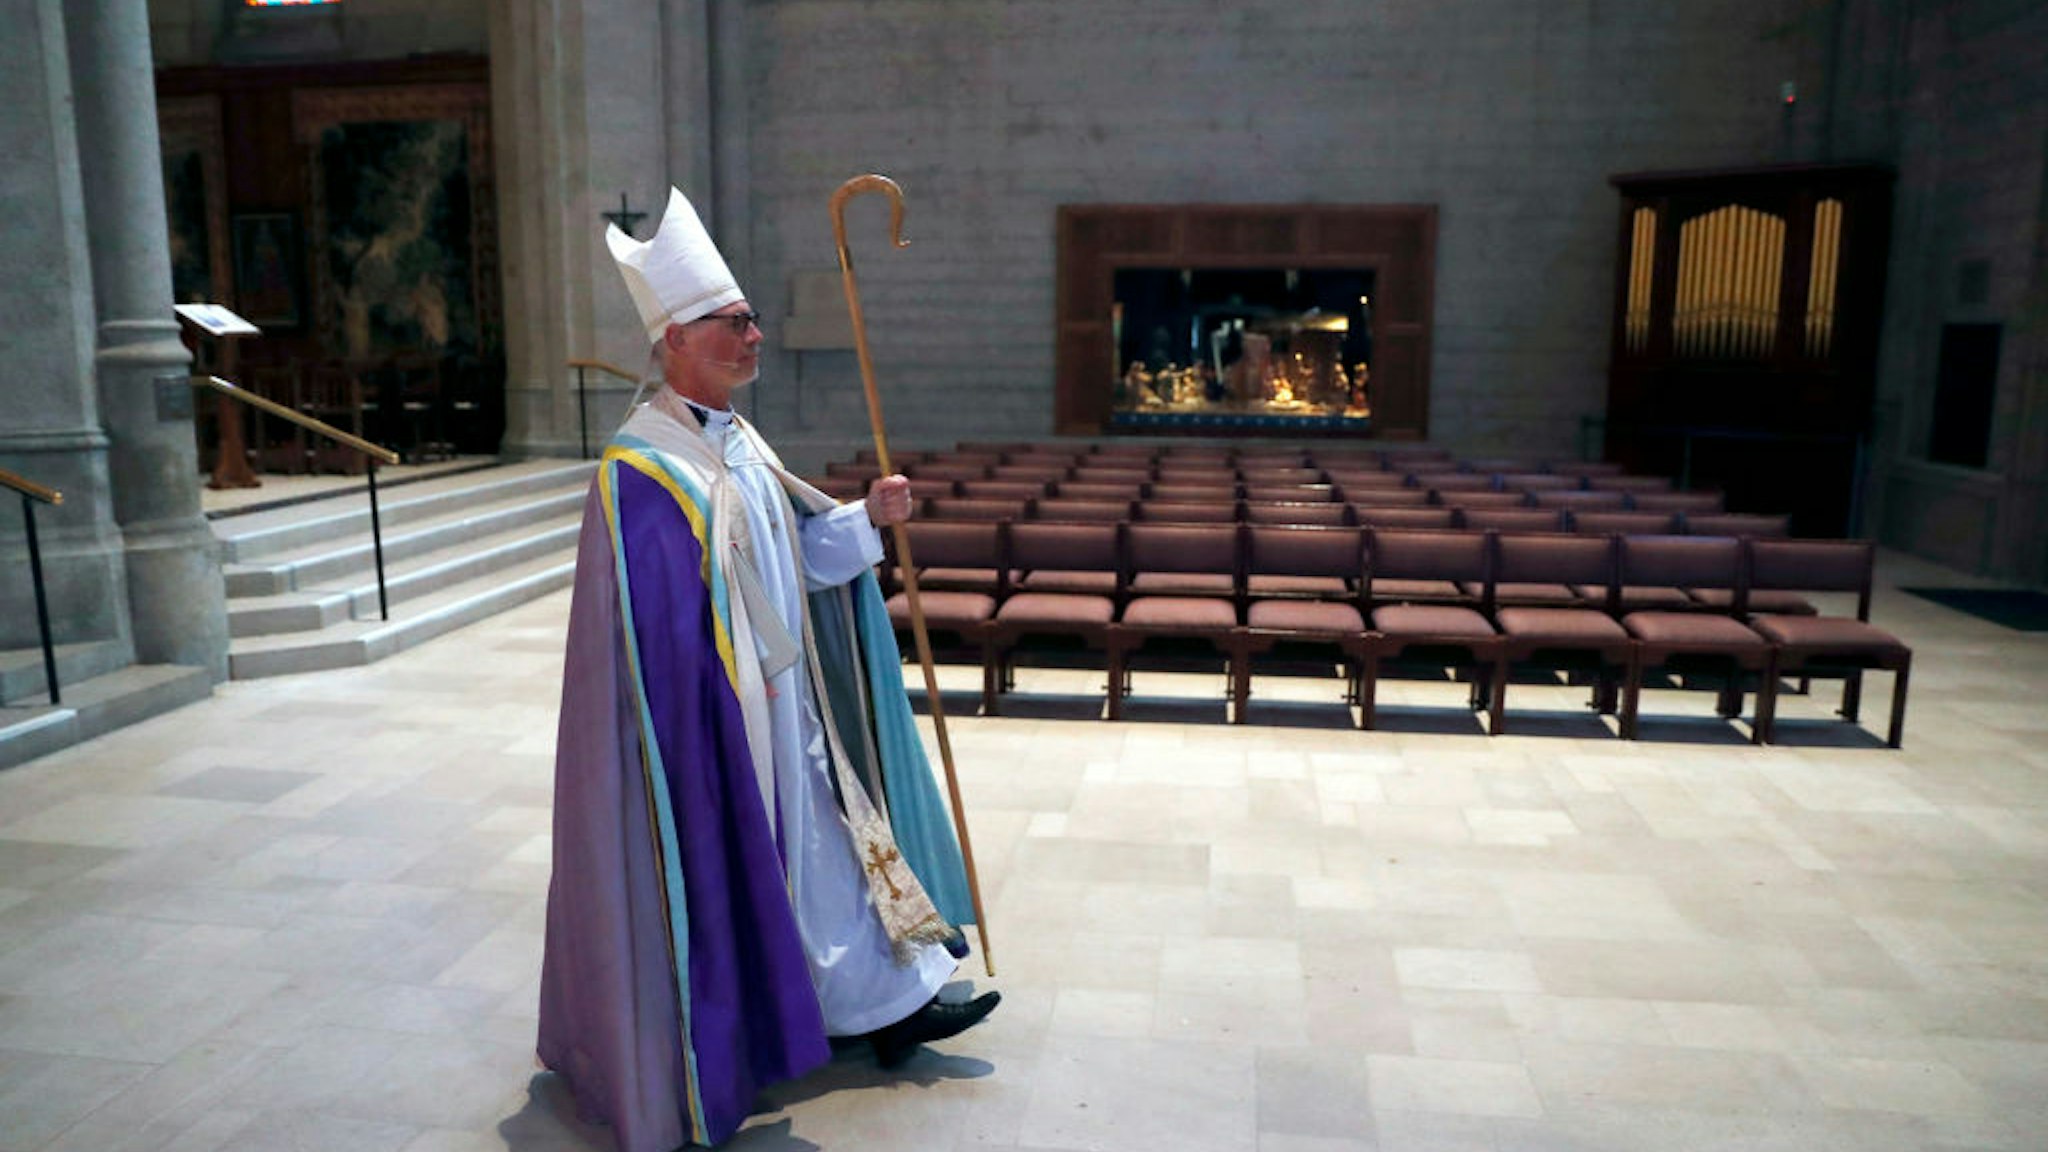 SAN FRANCISCO, CA - APRIL 12: Bishop Marc Andrus processes to altar during virtual Easter Sunday service at an empty Grace Cathedral in San Francisco, Calif., on Sunday, April 12, 2020.